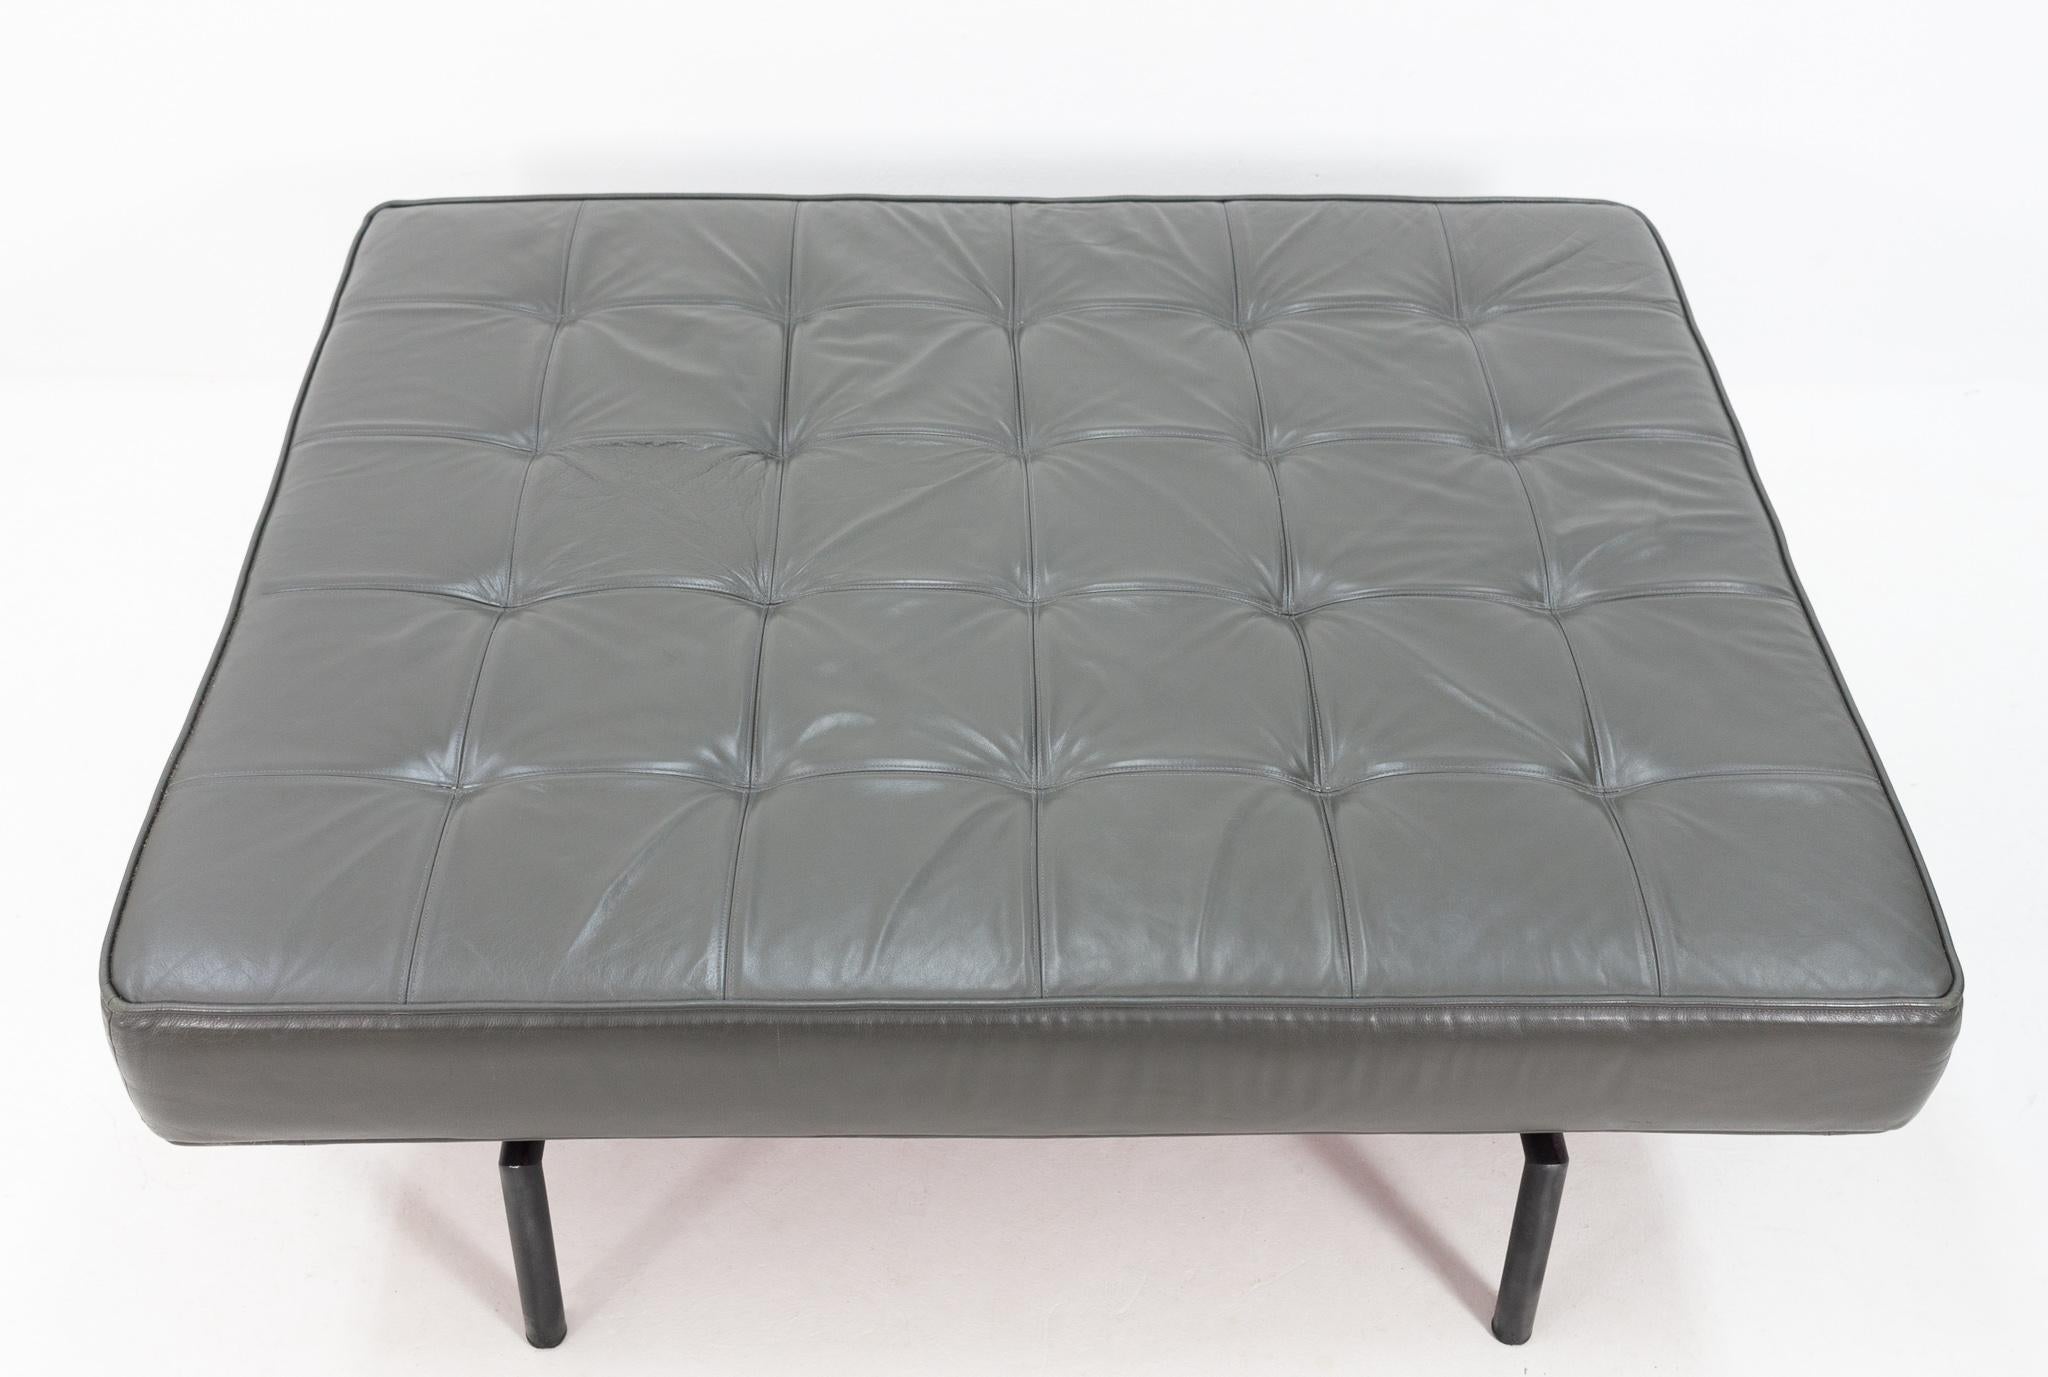 Large tufted grey leather pouf / ottoman. Great looking pouf. Black round metal feet, 1970s.
    